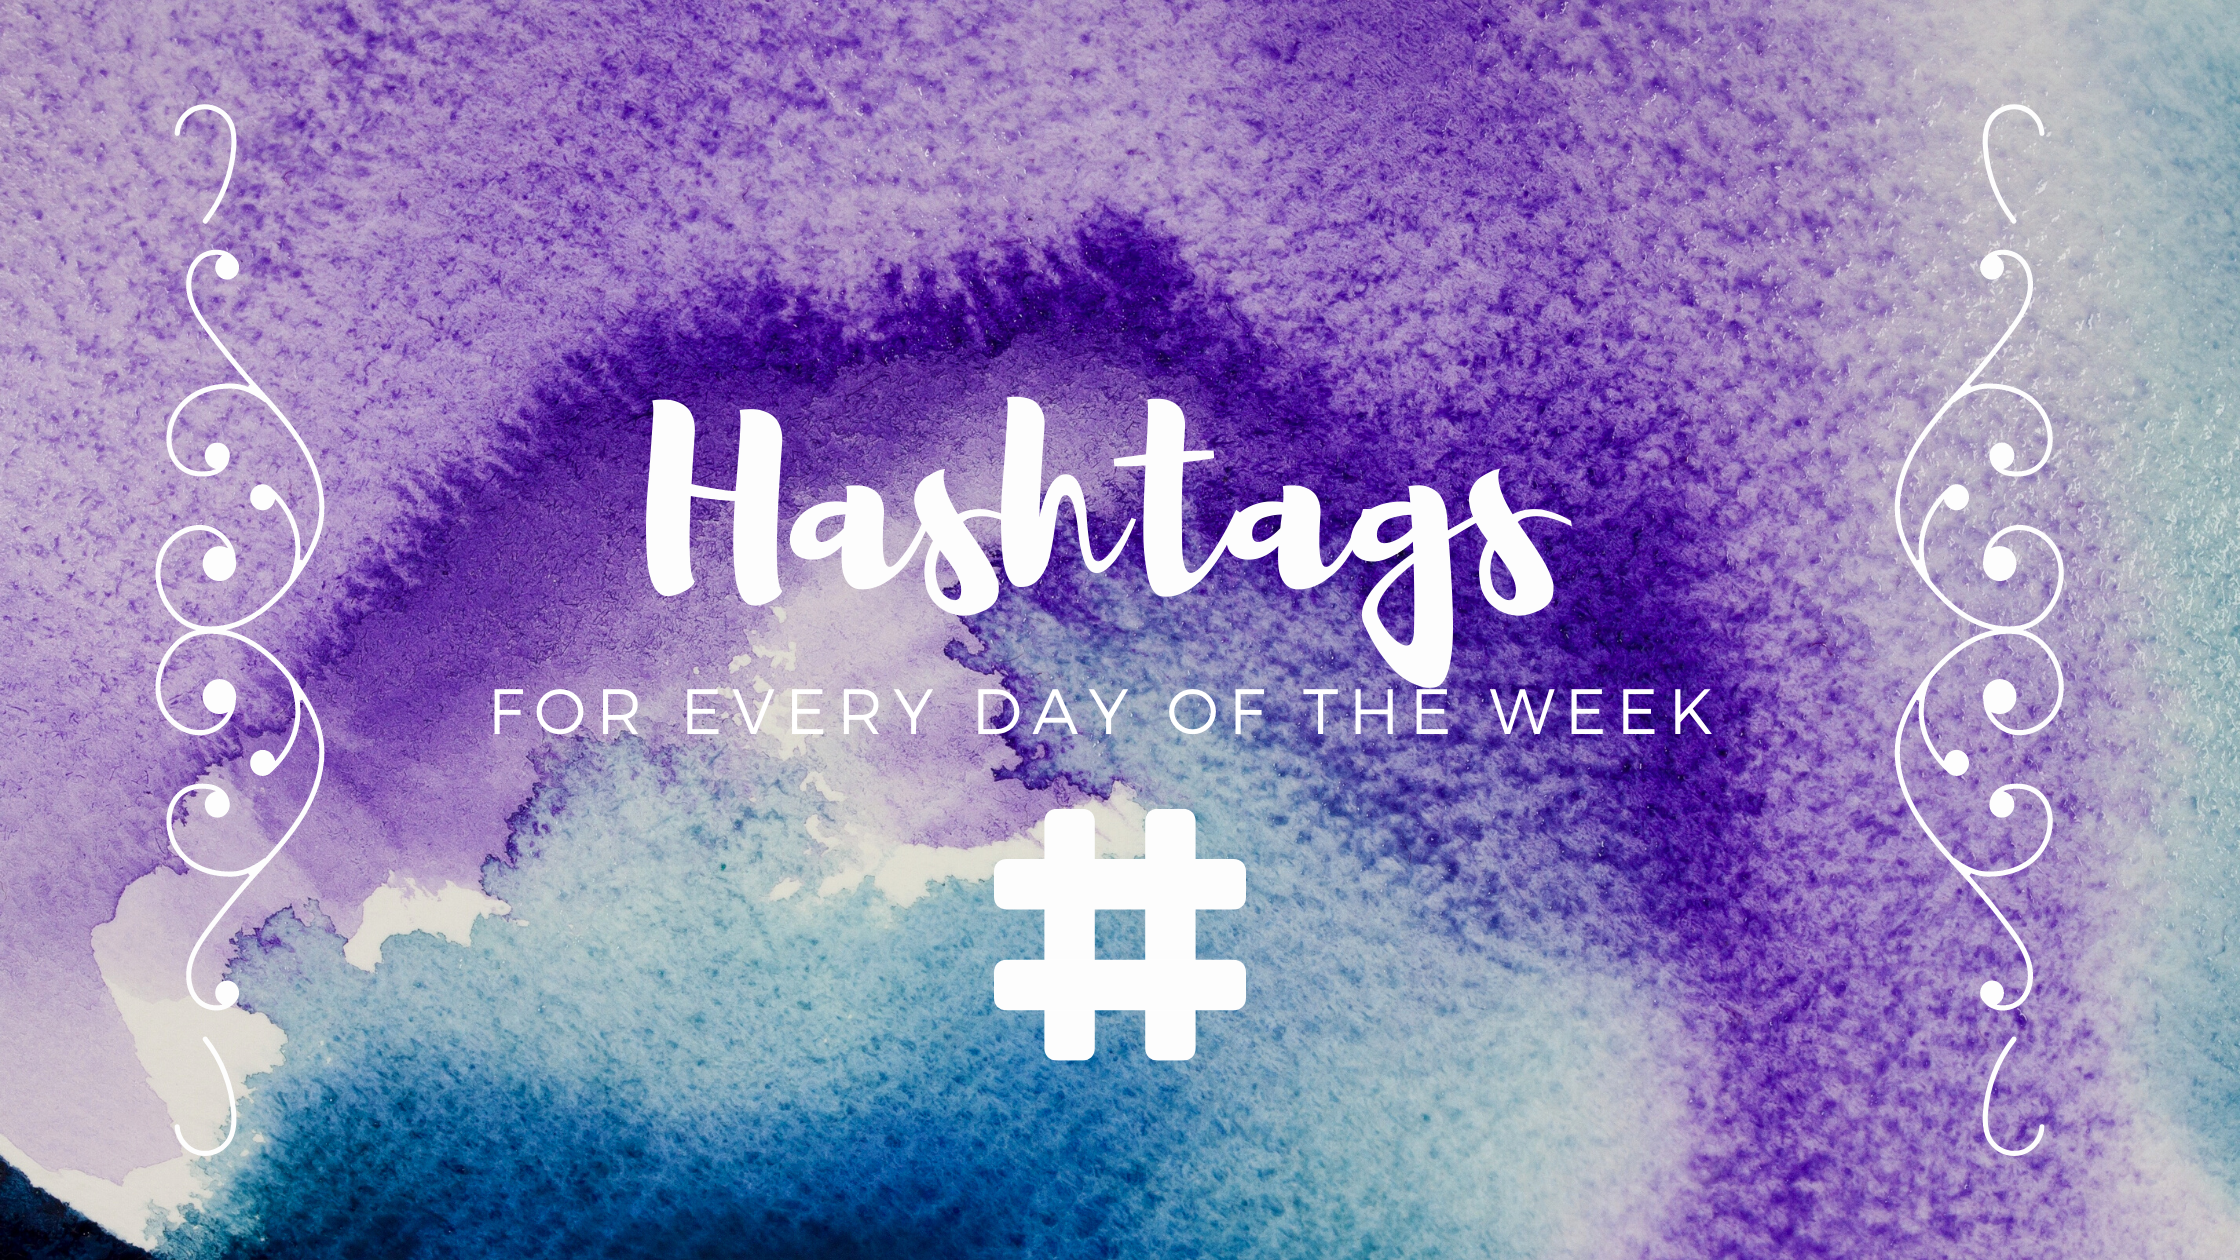 hashtag blog banner Hashtags For Every Day of the Week